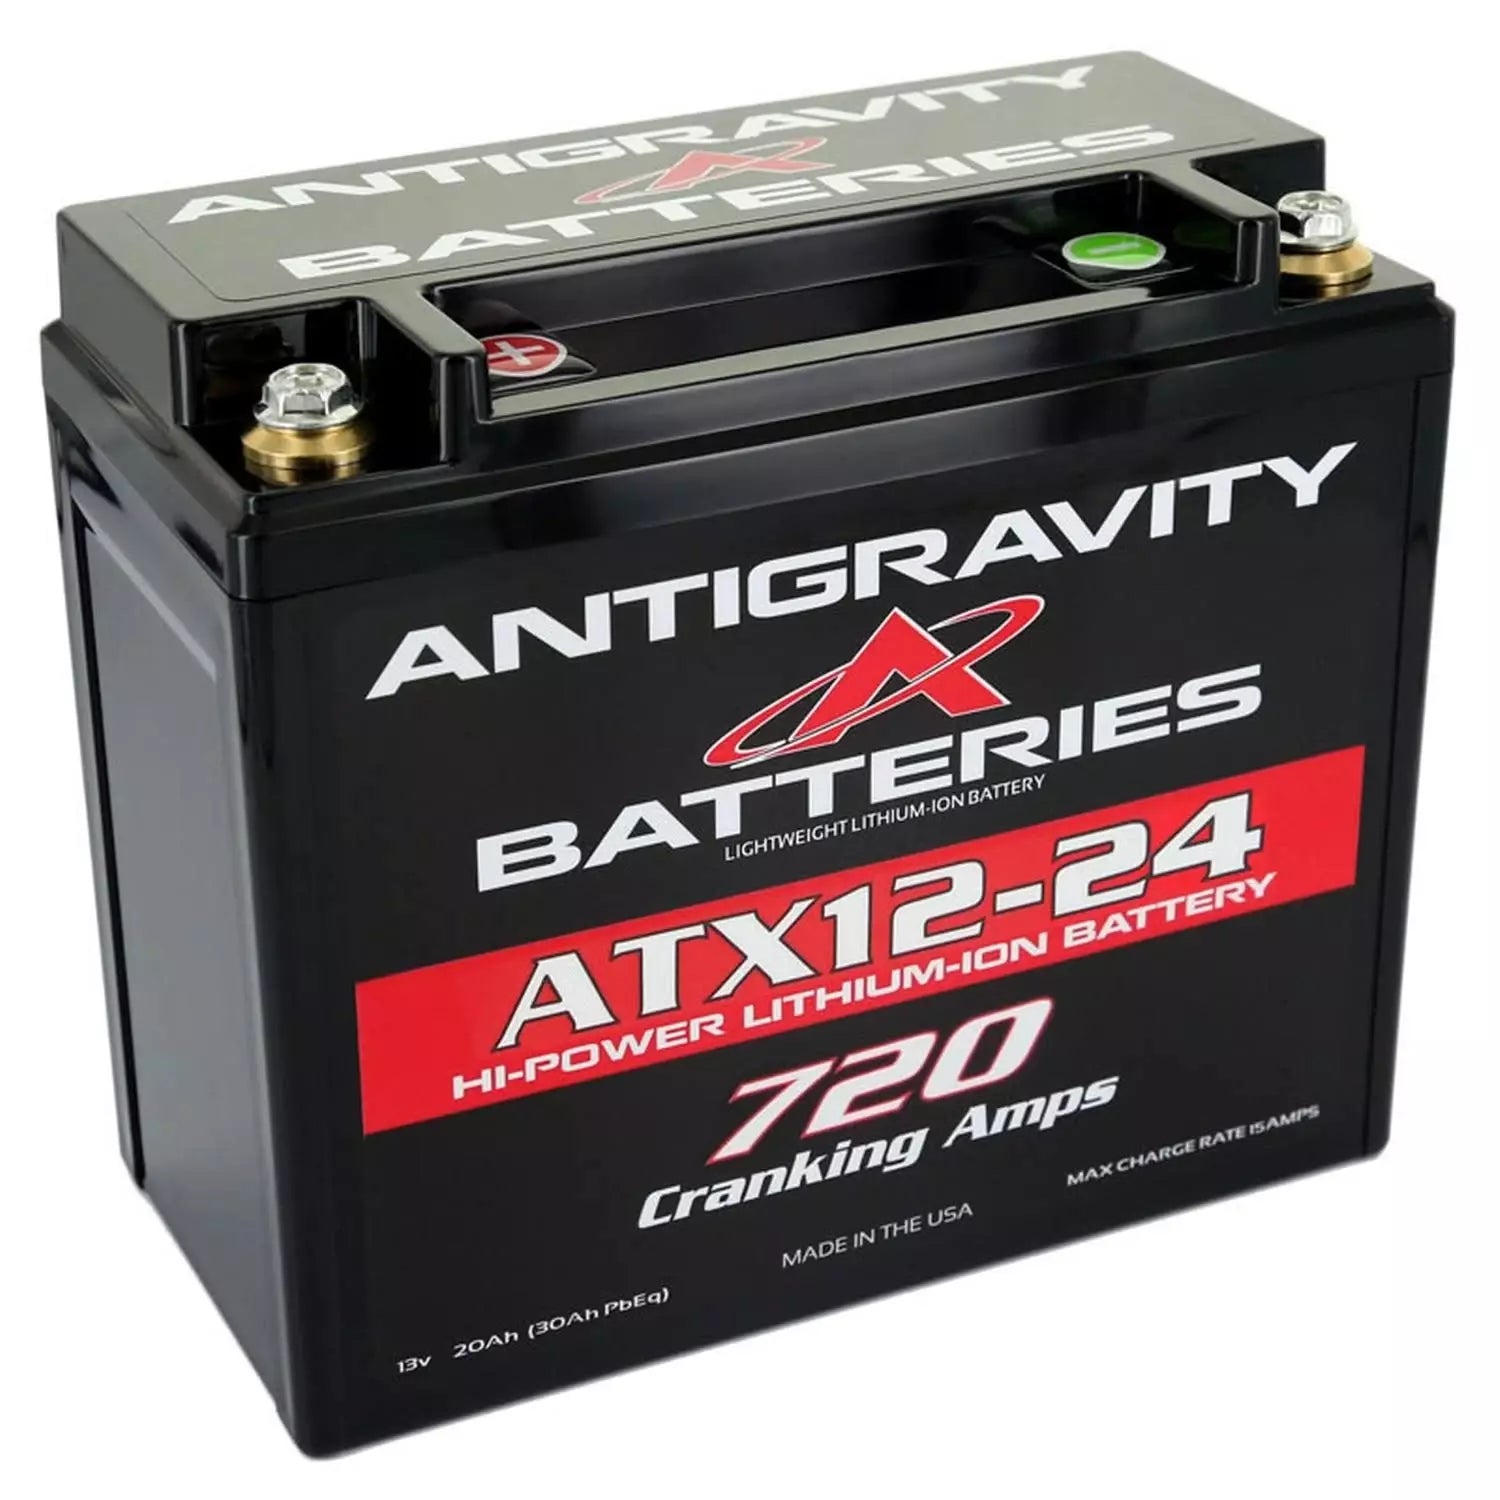 Antigravity Batteries Lithium Battery 720CCA 12Volt 4.5Lbs 24 Cell Charging Systems Batteries main image